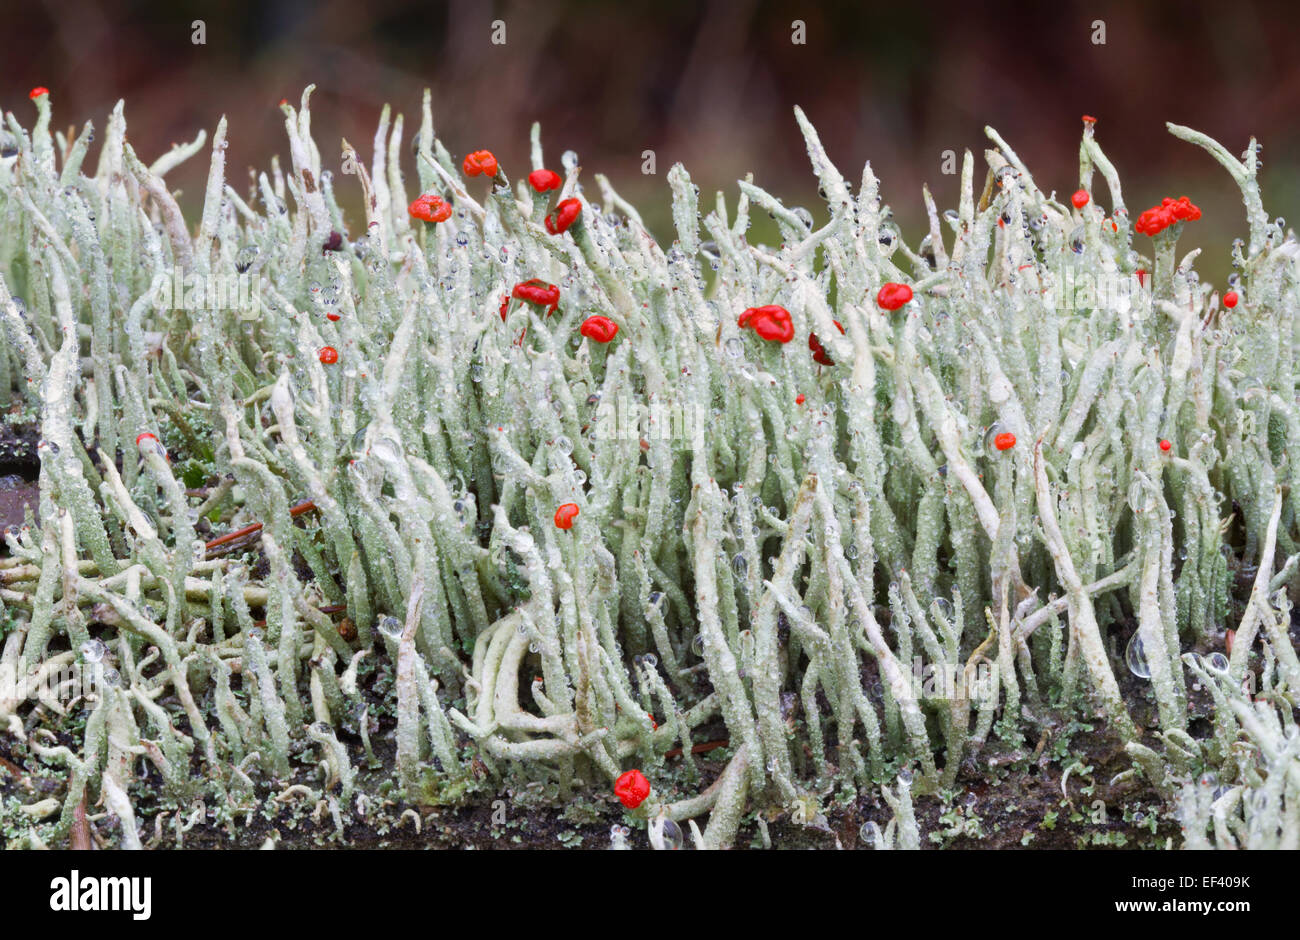 Lipstick Cladonia (Cladonia macilenta) with red fruiting bodies, with rain drops Stock Photo